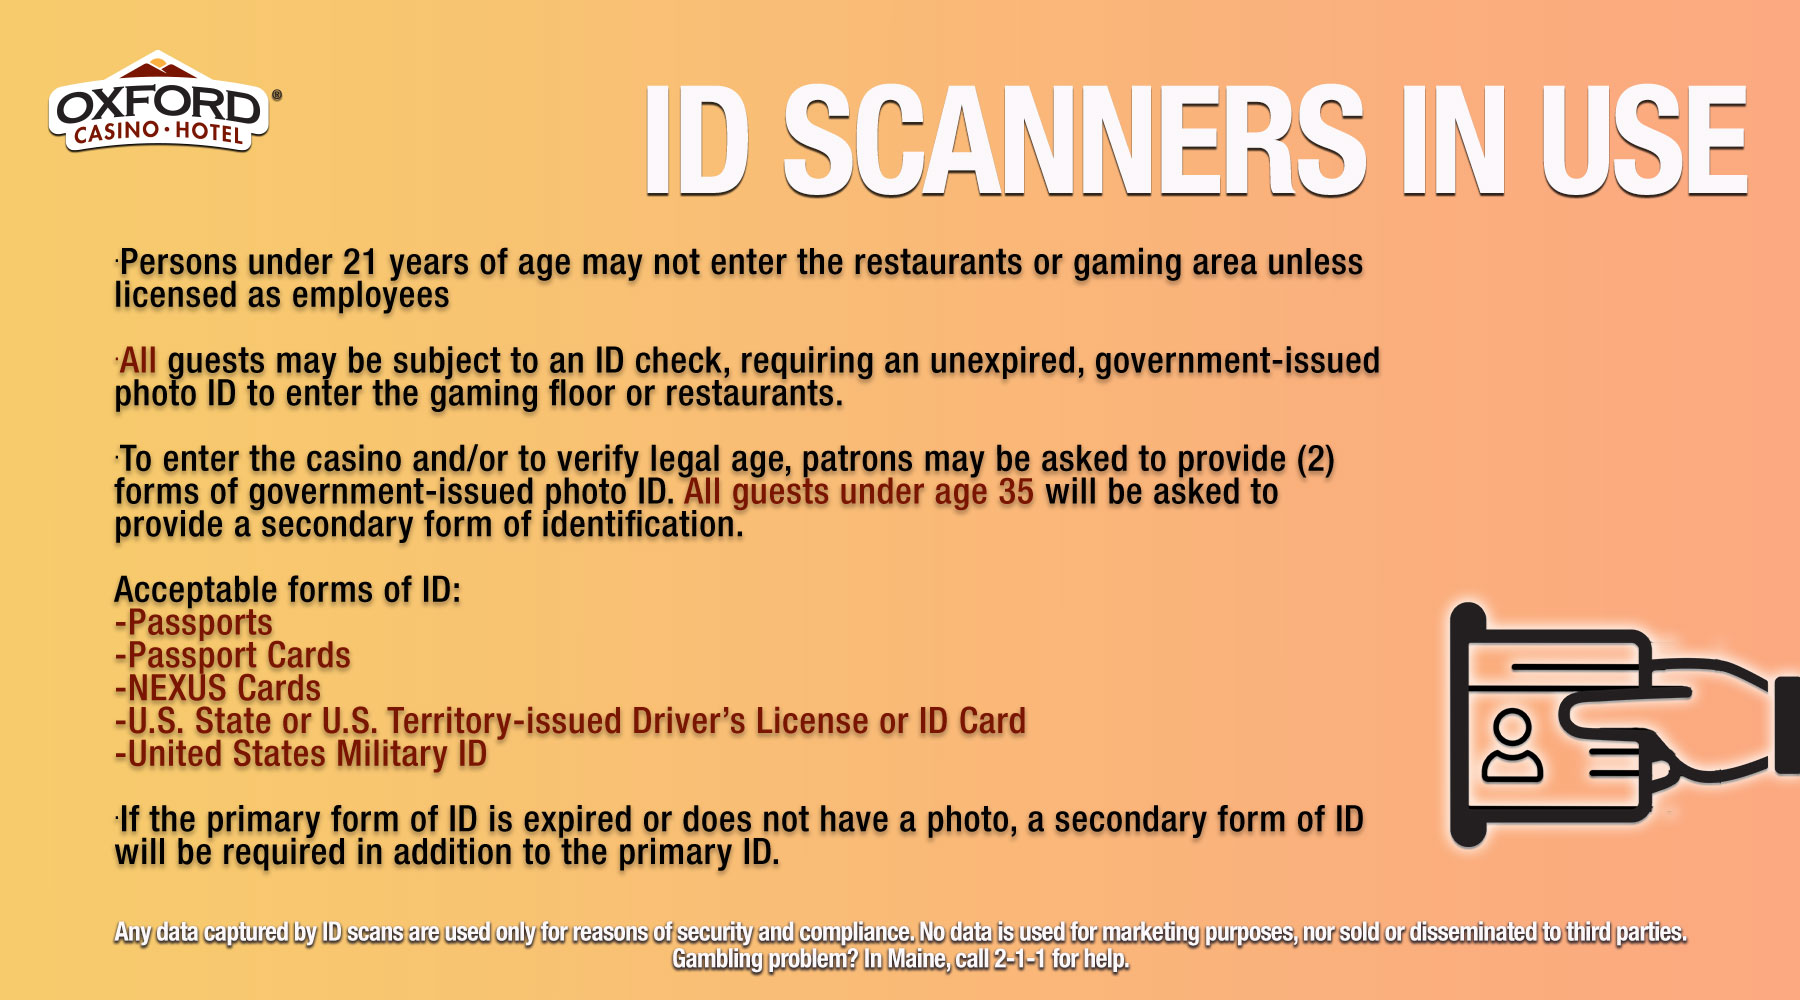 ID Scanners - Bring your ID!